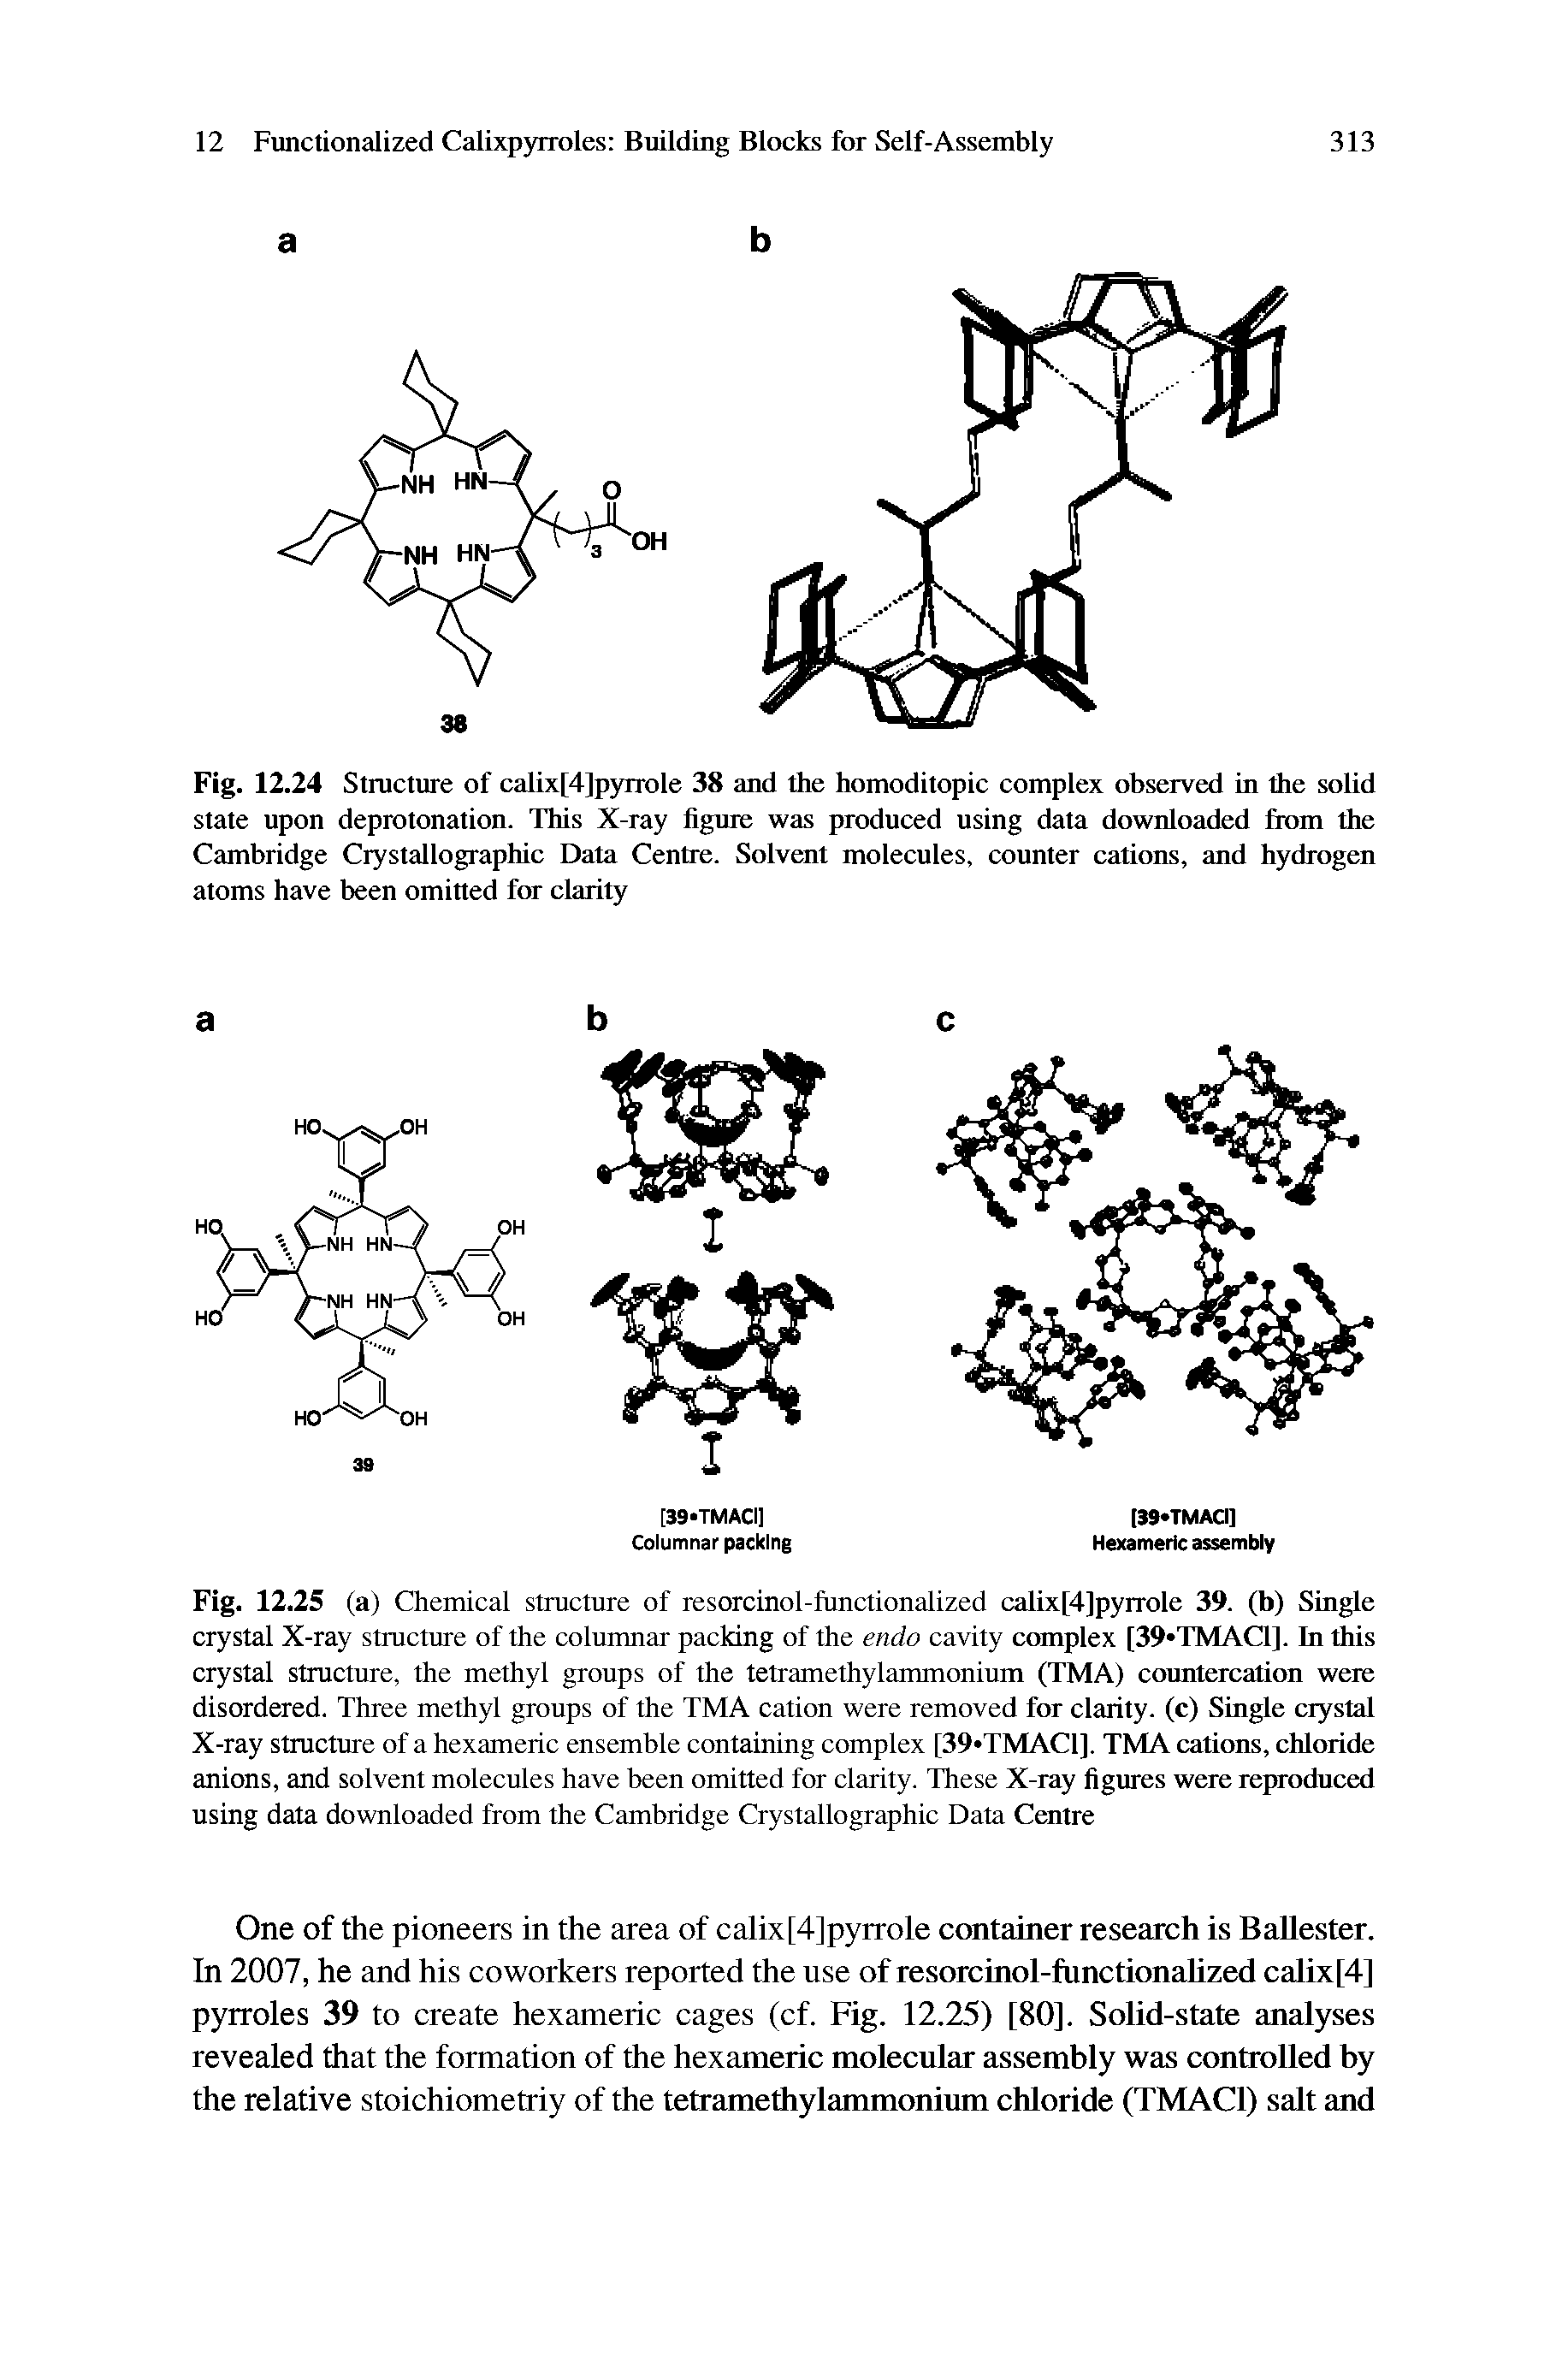 Fig. 12.24 Structure of calix[4]pyrrole 38 and the homoditopic complex observed in the solid state upon deprotonation. This X-ray figure was produced using data downloaded from the Cambridge Crystallographic Data Centre. Solvent molecules, counter cations, and hydrogen atoms have been omitted for clarity...